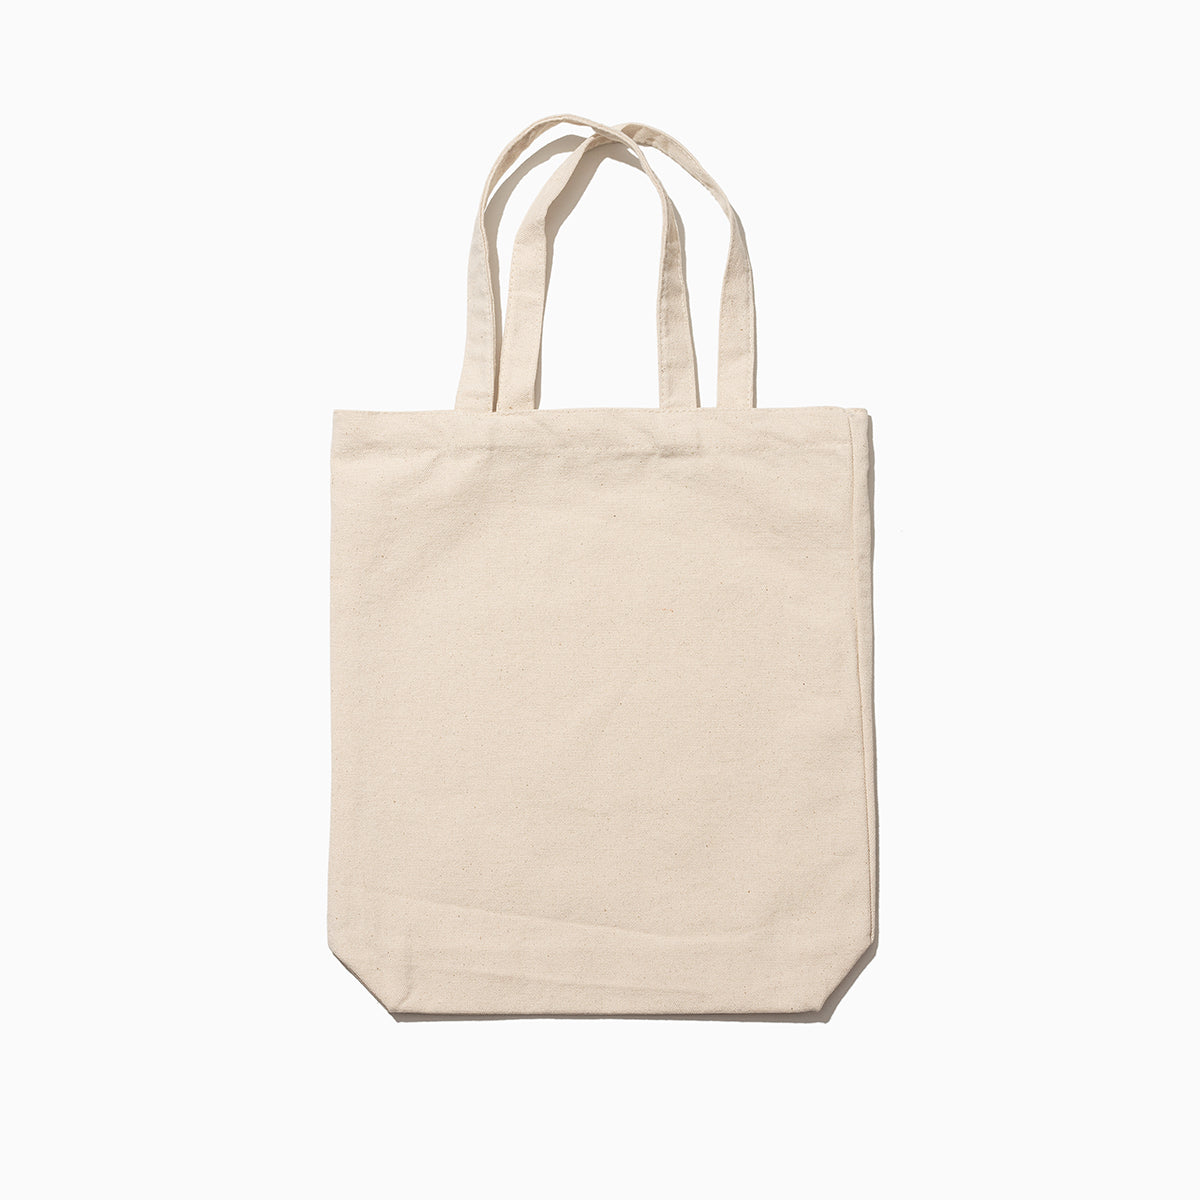 Motto Canvas Tote Bag | Product Detail Image | Uncommon James Home